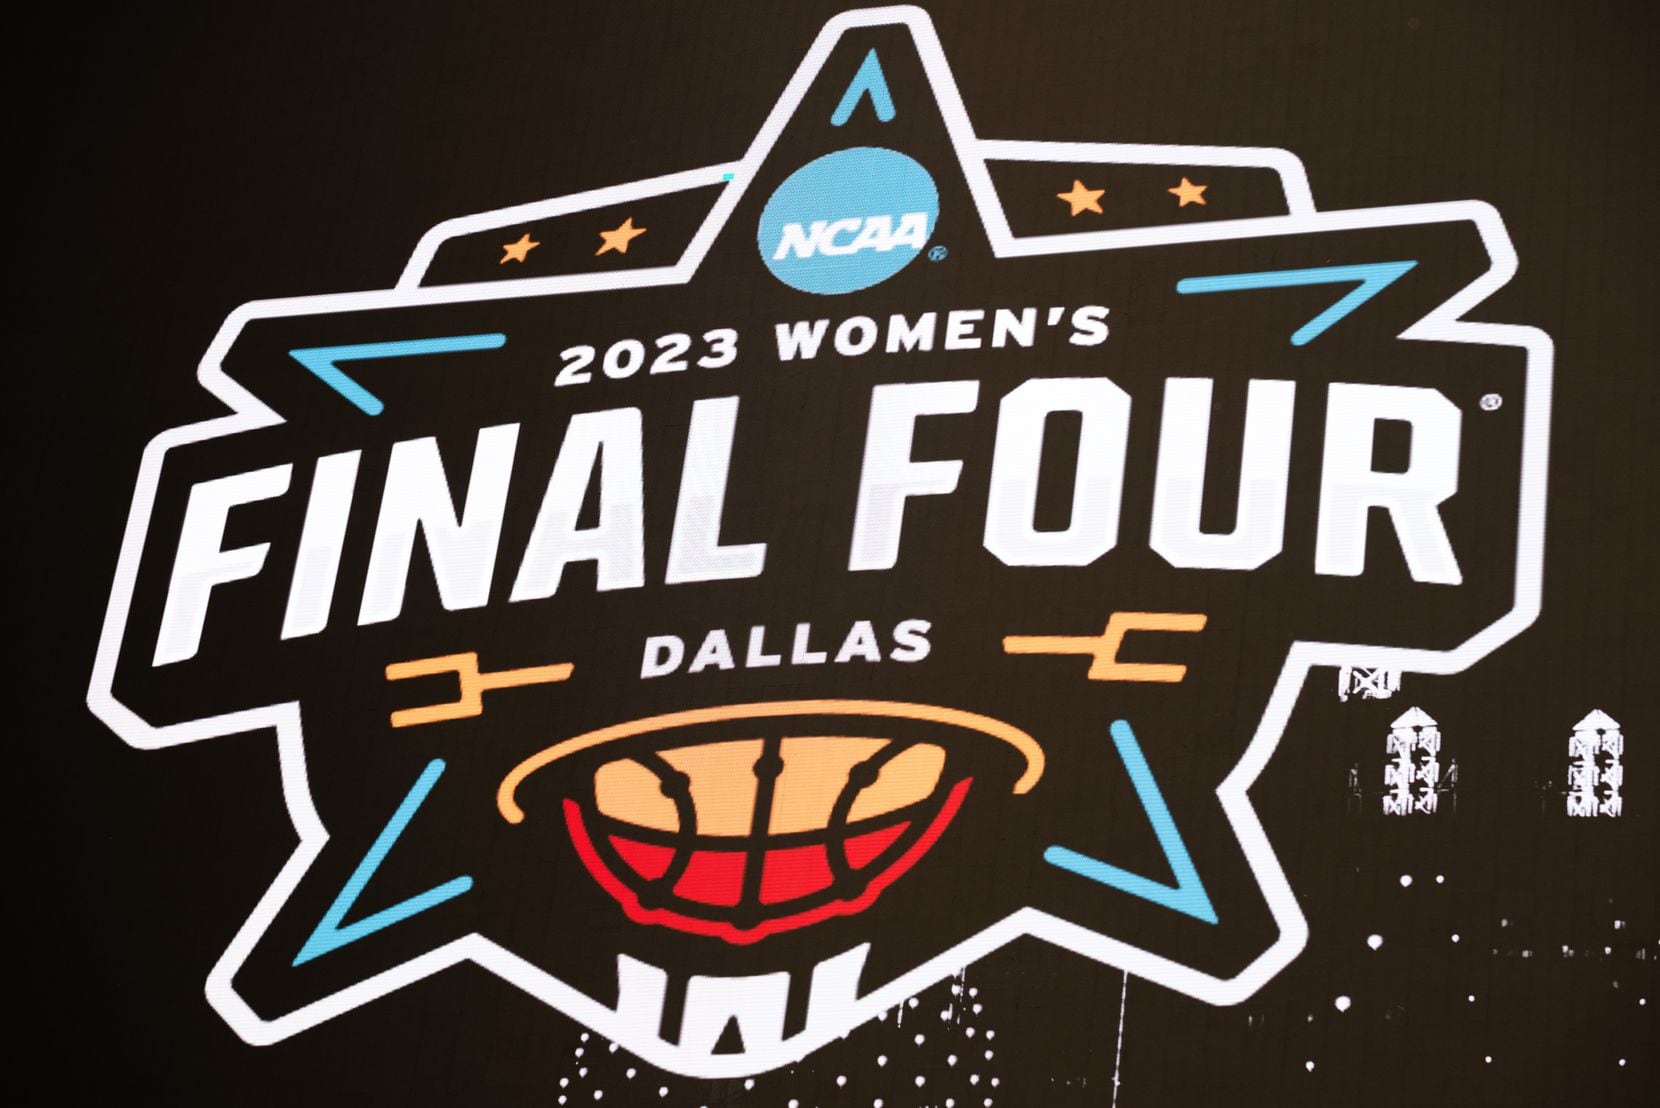 Photos There it is! The NCAA reveals the logo for the 2023 women's